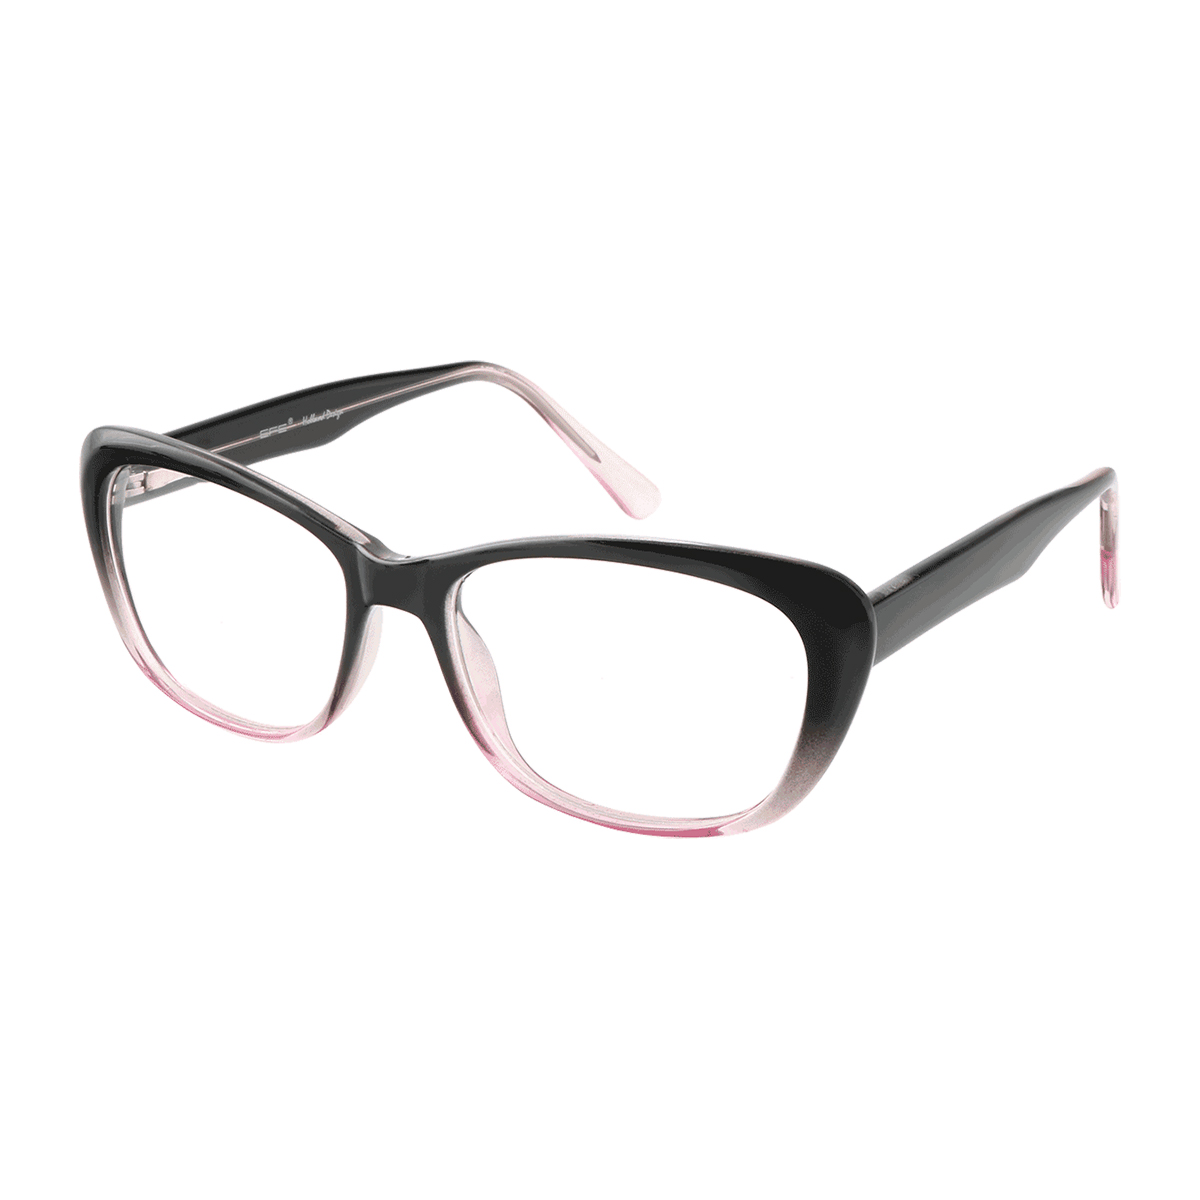 Petra - Square Pink-Black Reading Glasses for Women